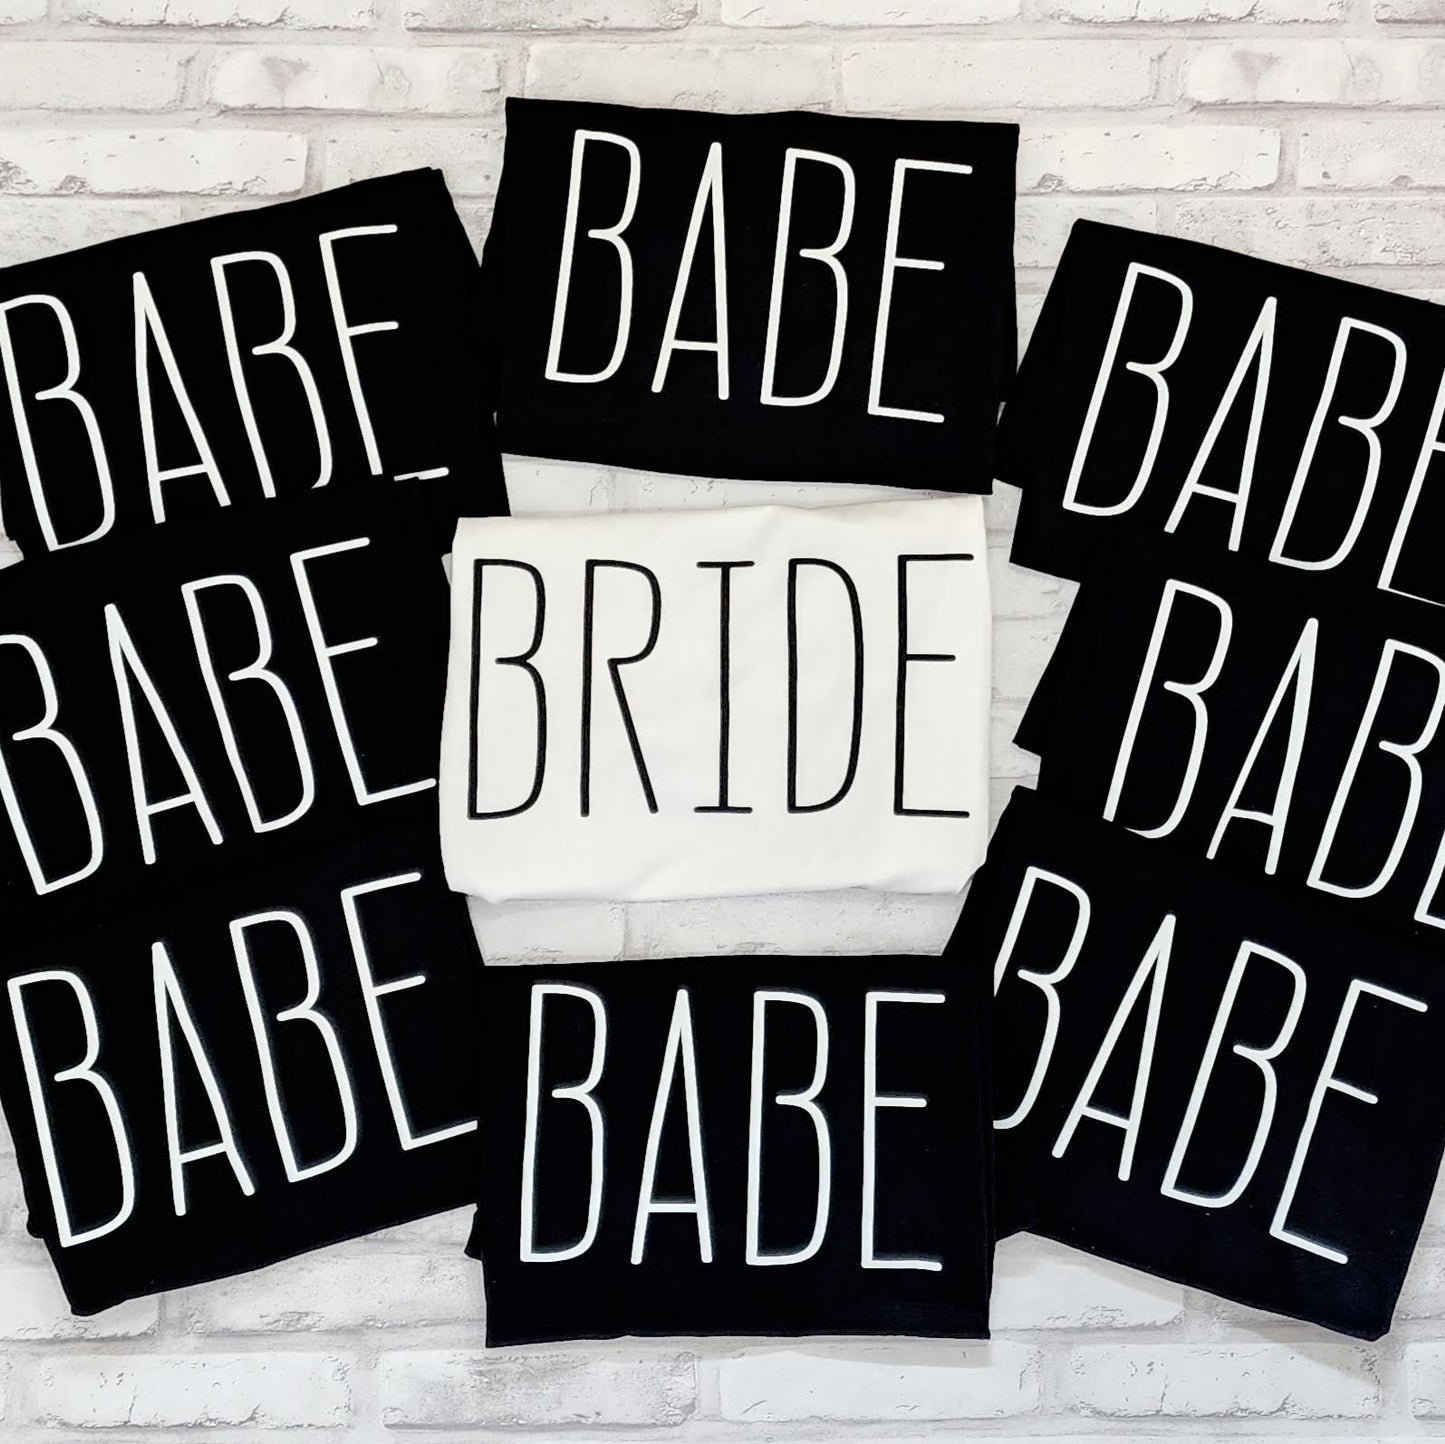 Bride and Babe Bachelorette Party T-shirts - Bridal Party Matching Shirts